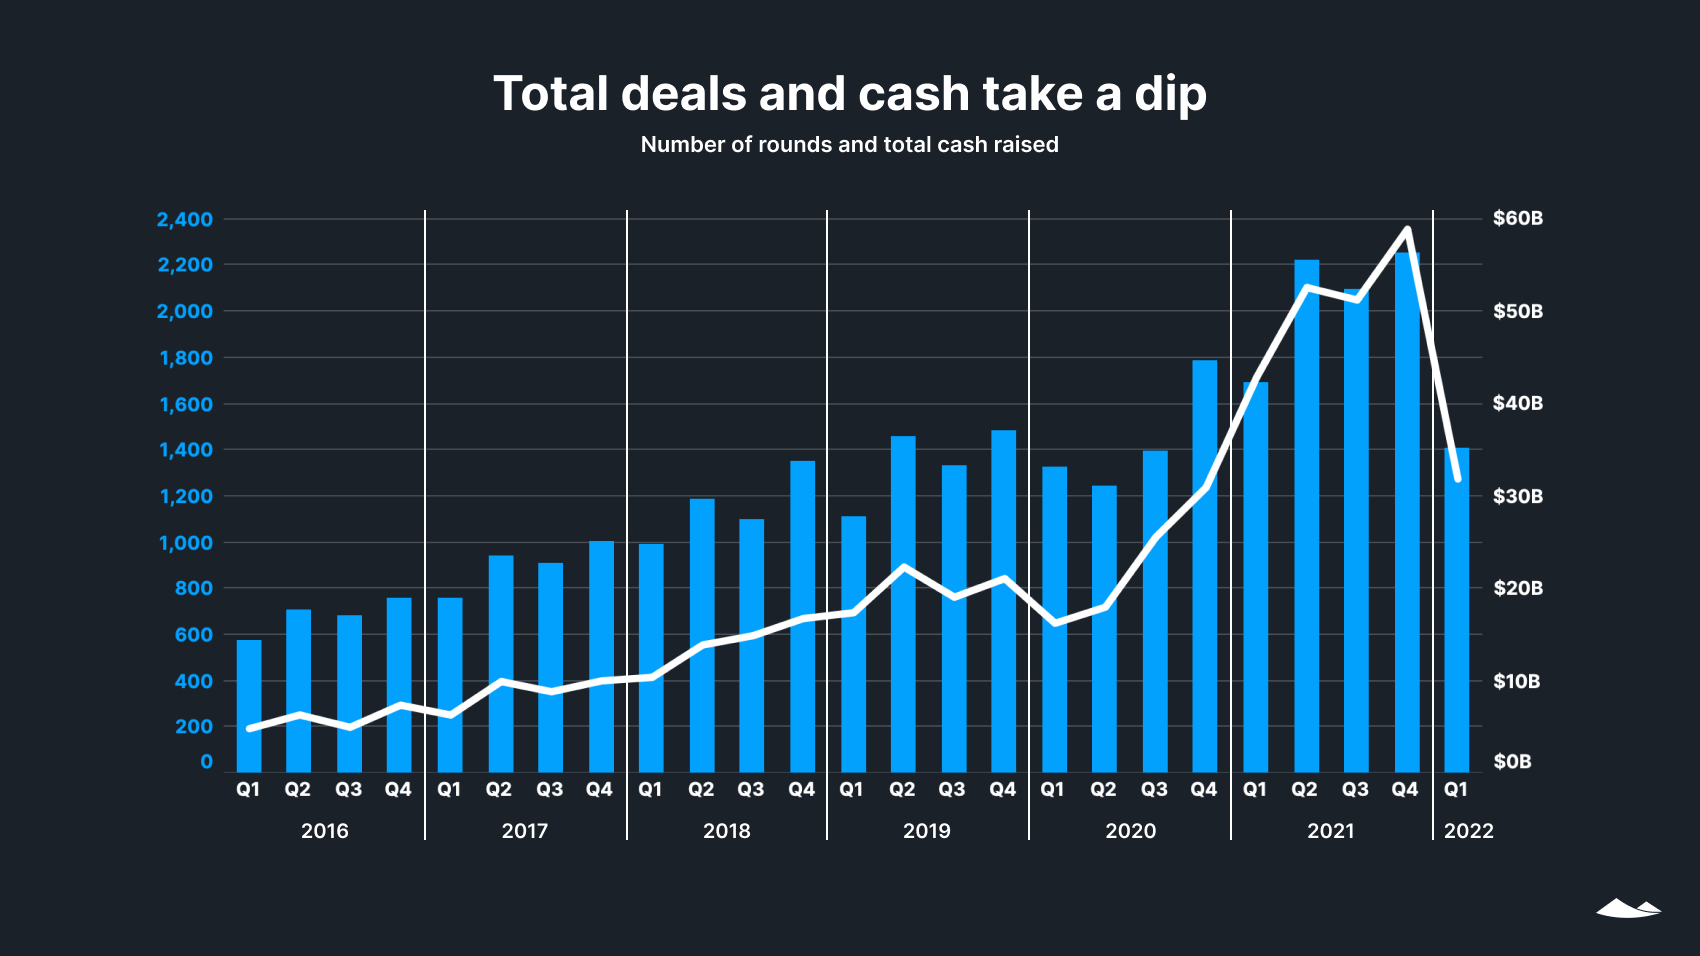 Bar chart shows the number of venture capital rounds and total cash raised by companies with a drop from Q4 2021 to Q1 2022.